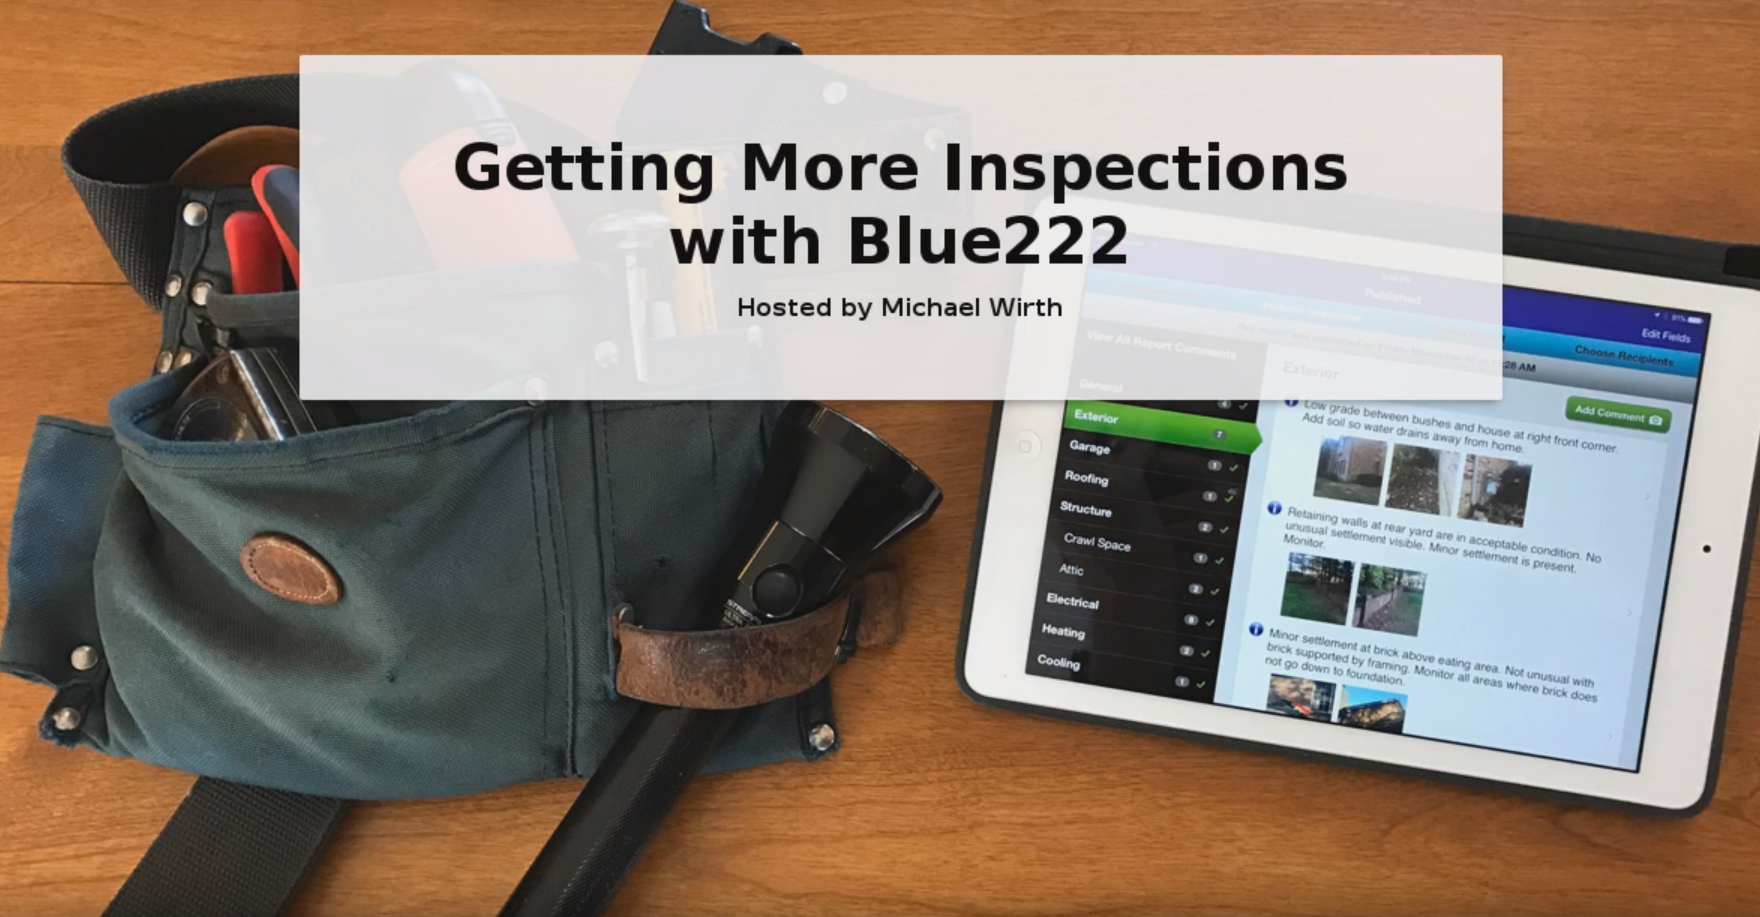 How to Get More Inspections with Blue222